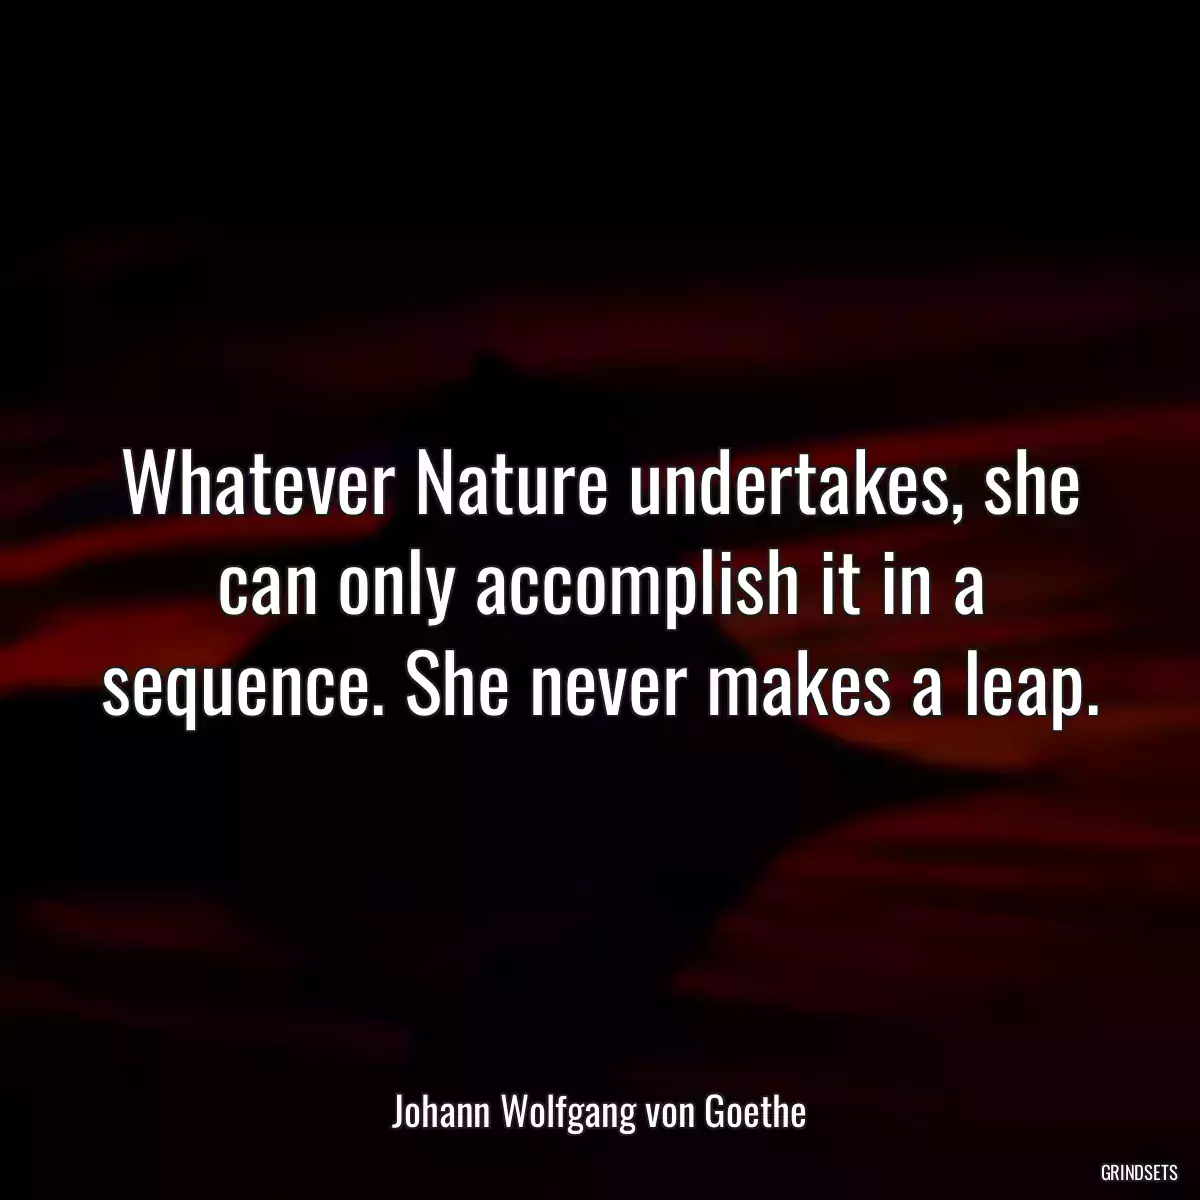 Whatever Nature undertakes, she can only accomplish it in a sequence. She never makes a leap.